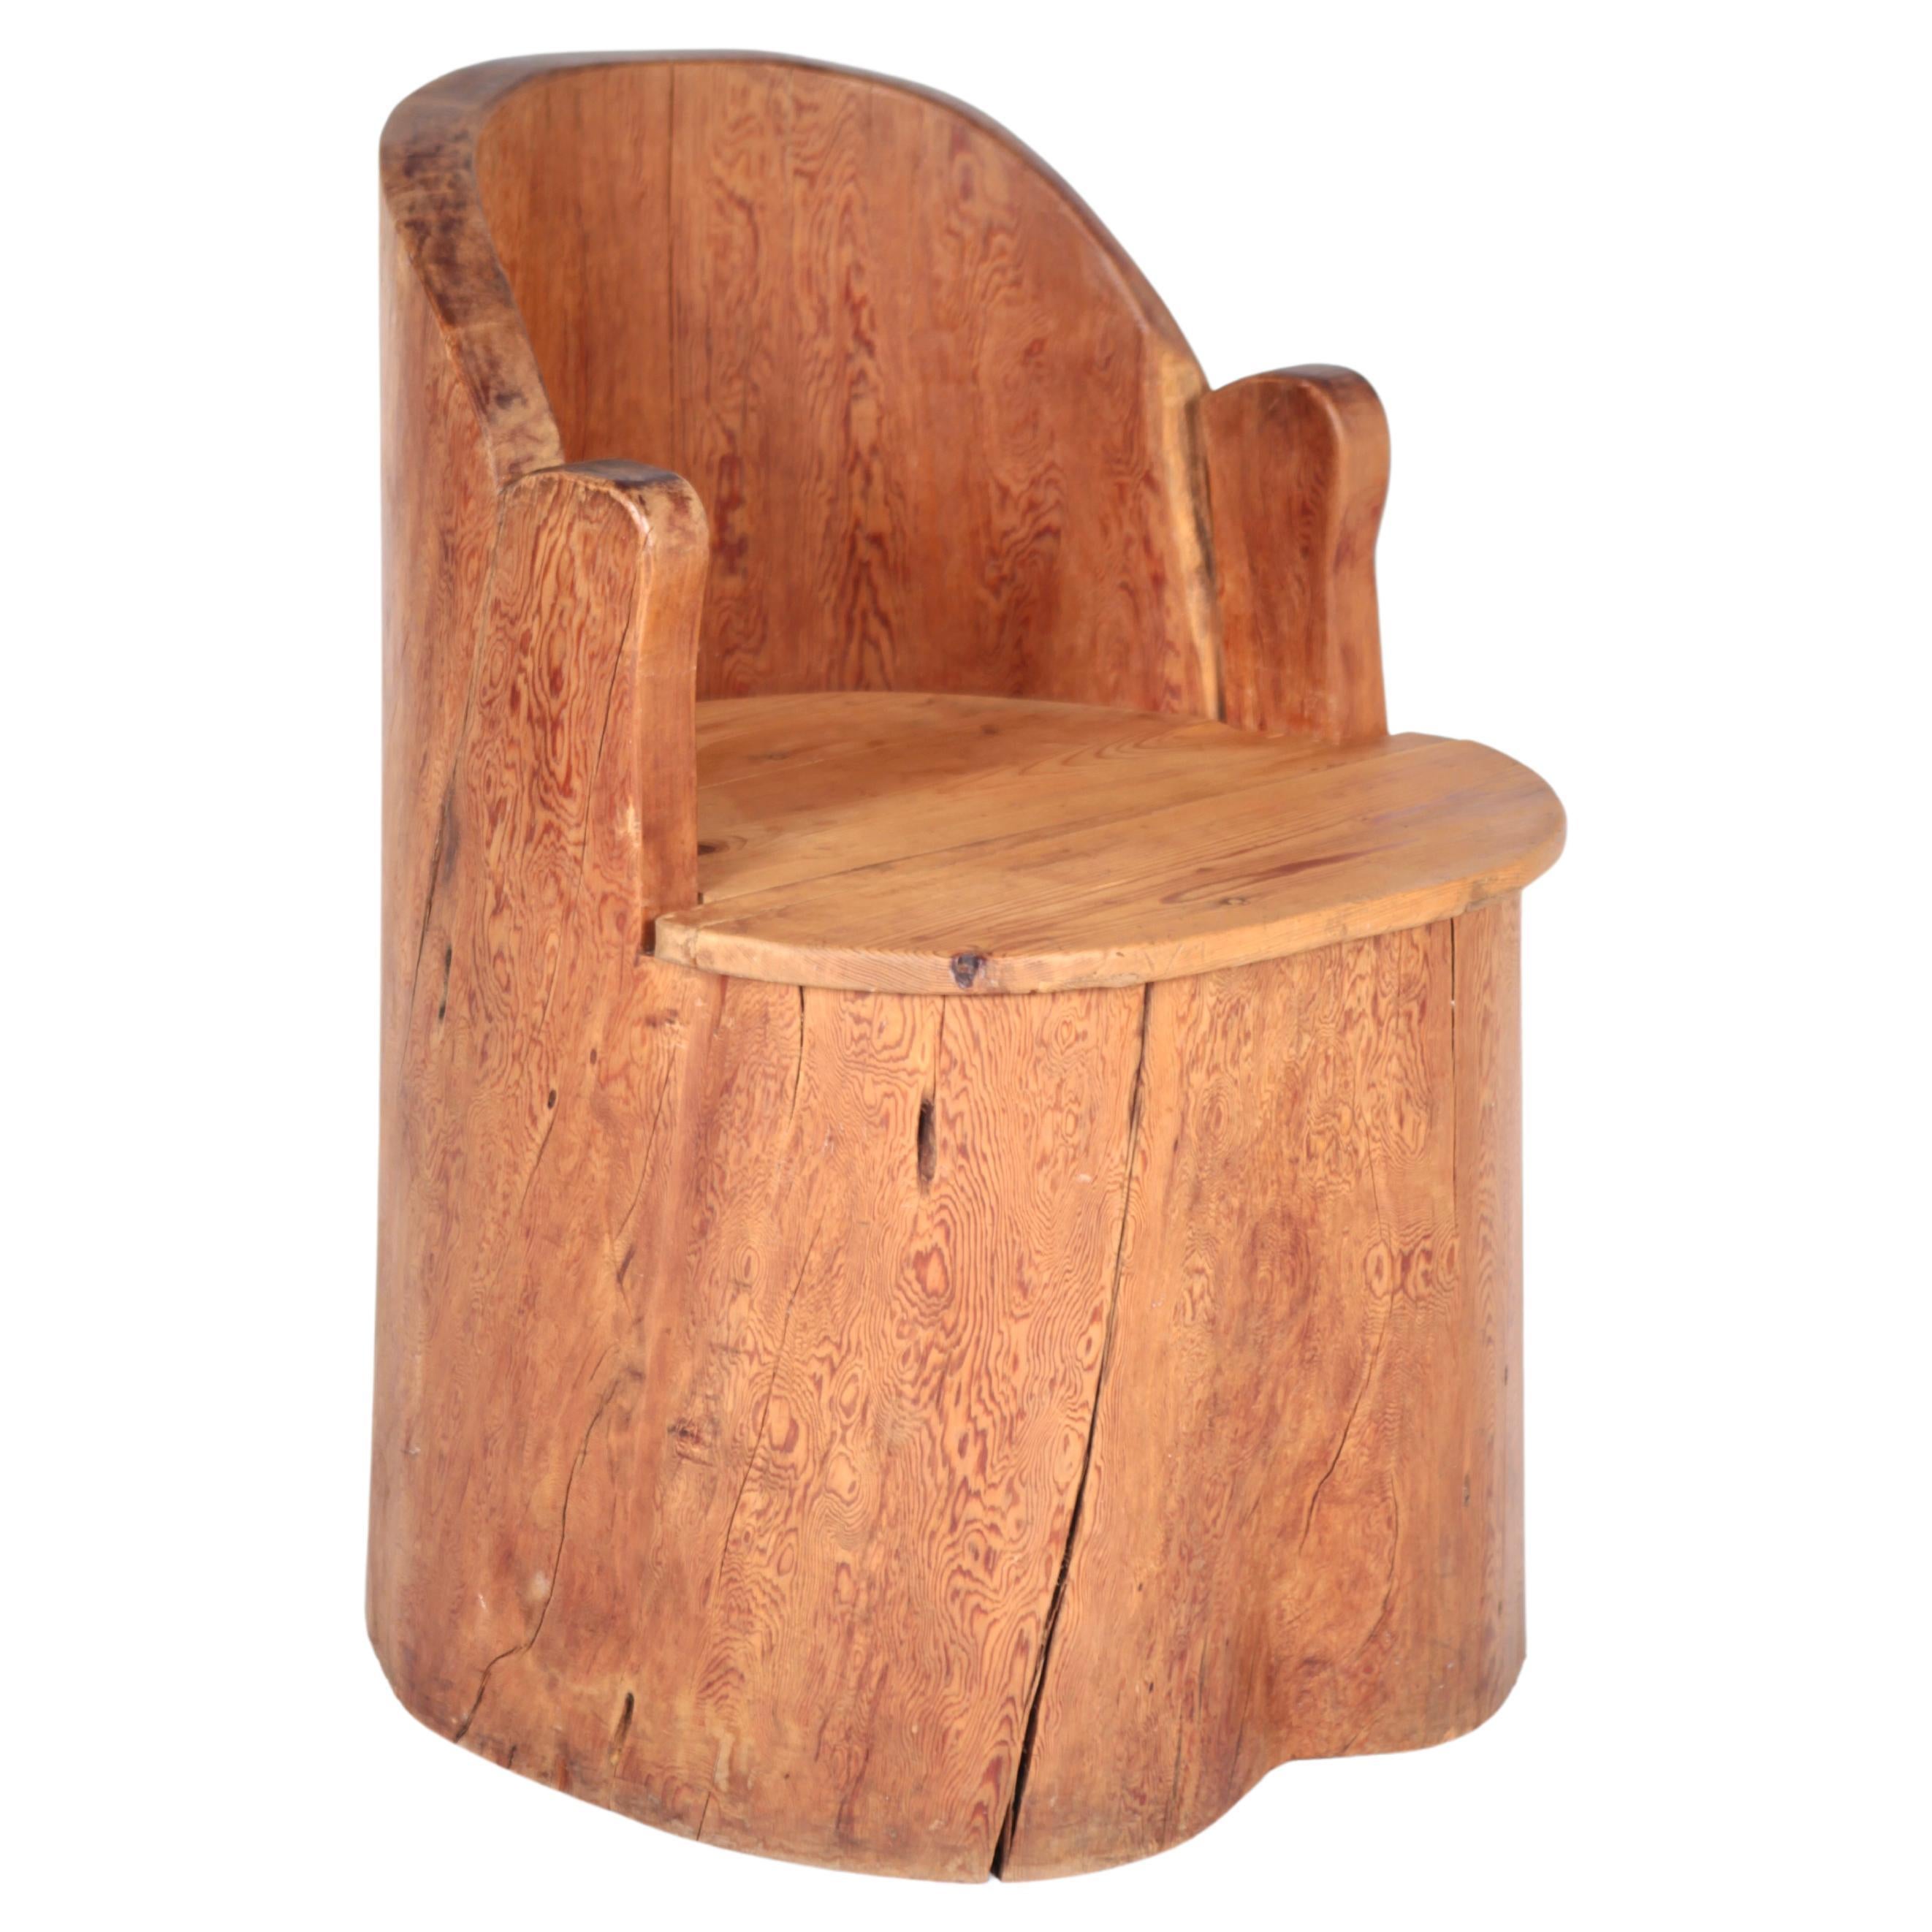 Stump Chair in Pine, Mora, Sweden 1930s. For Sale